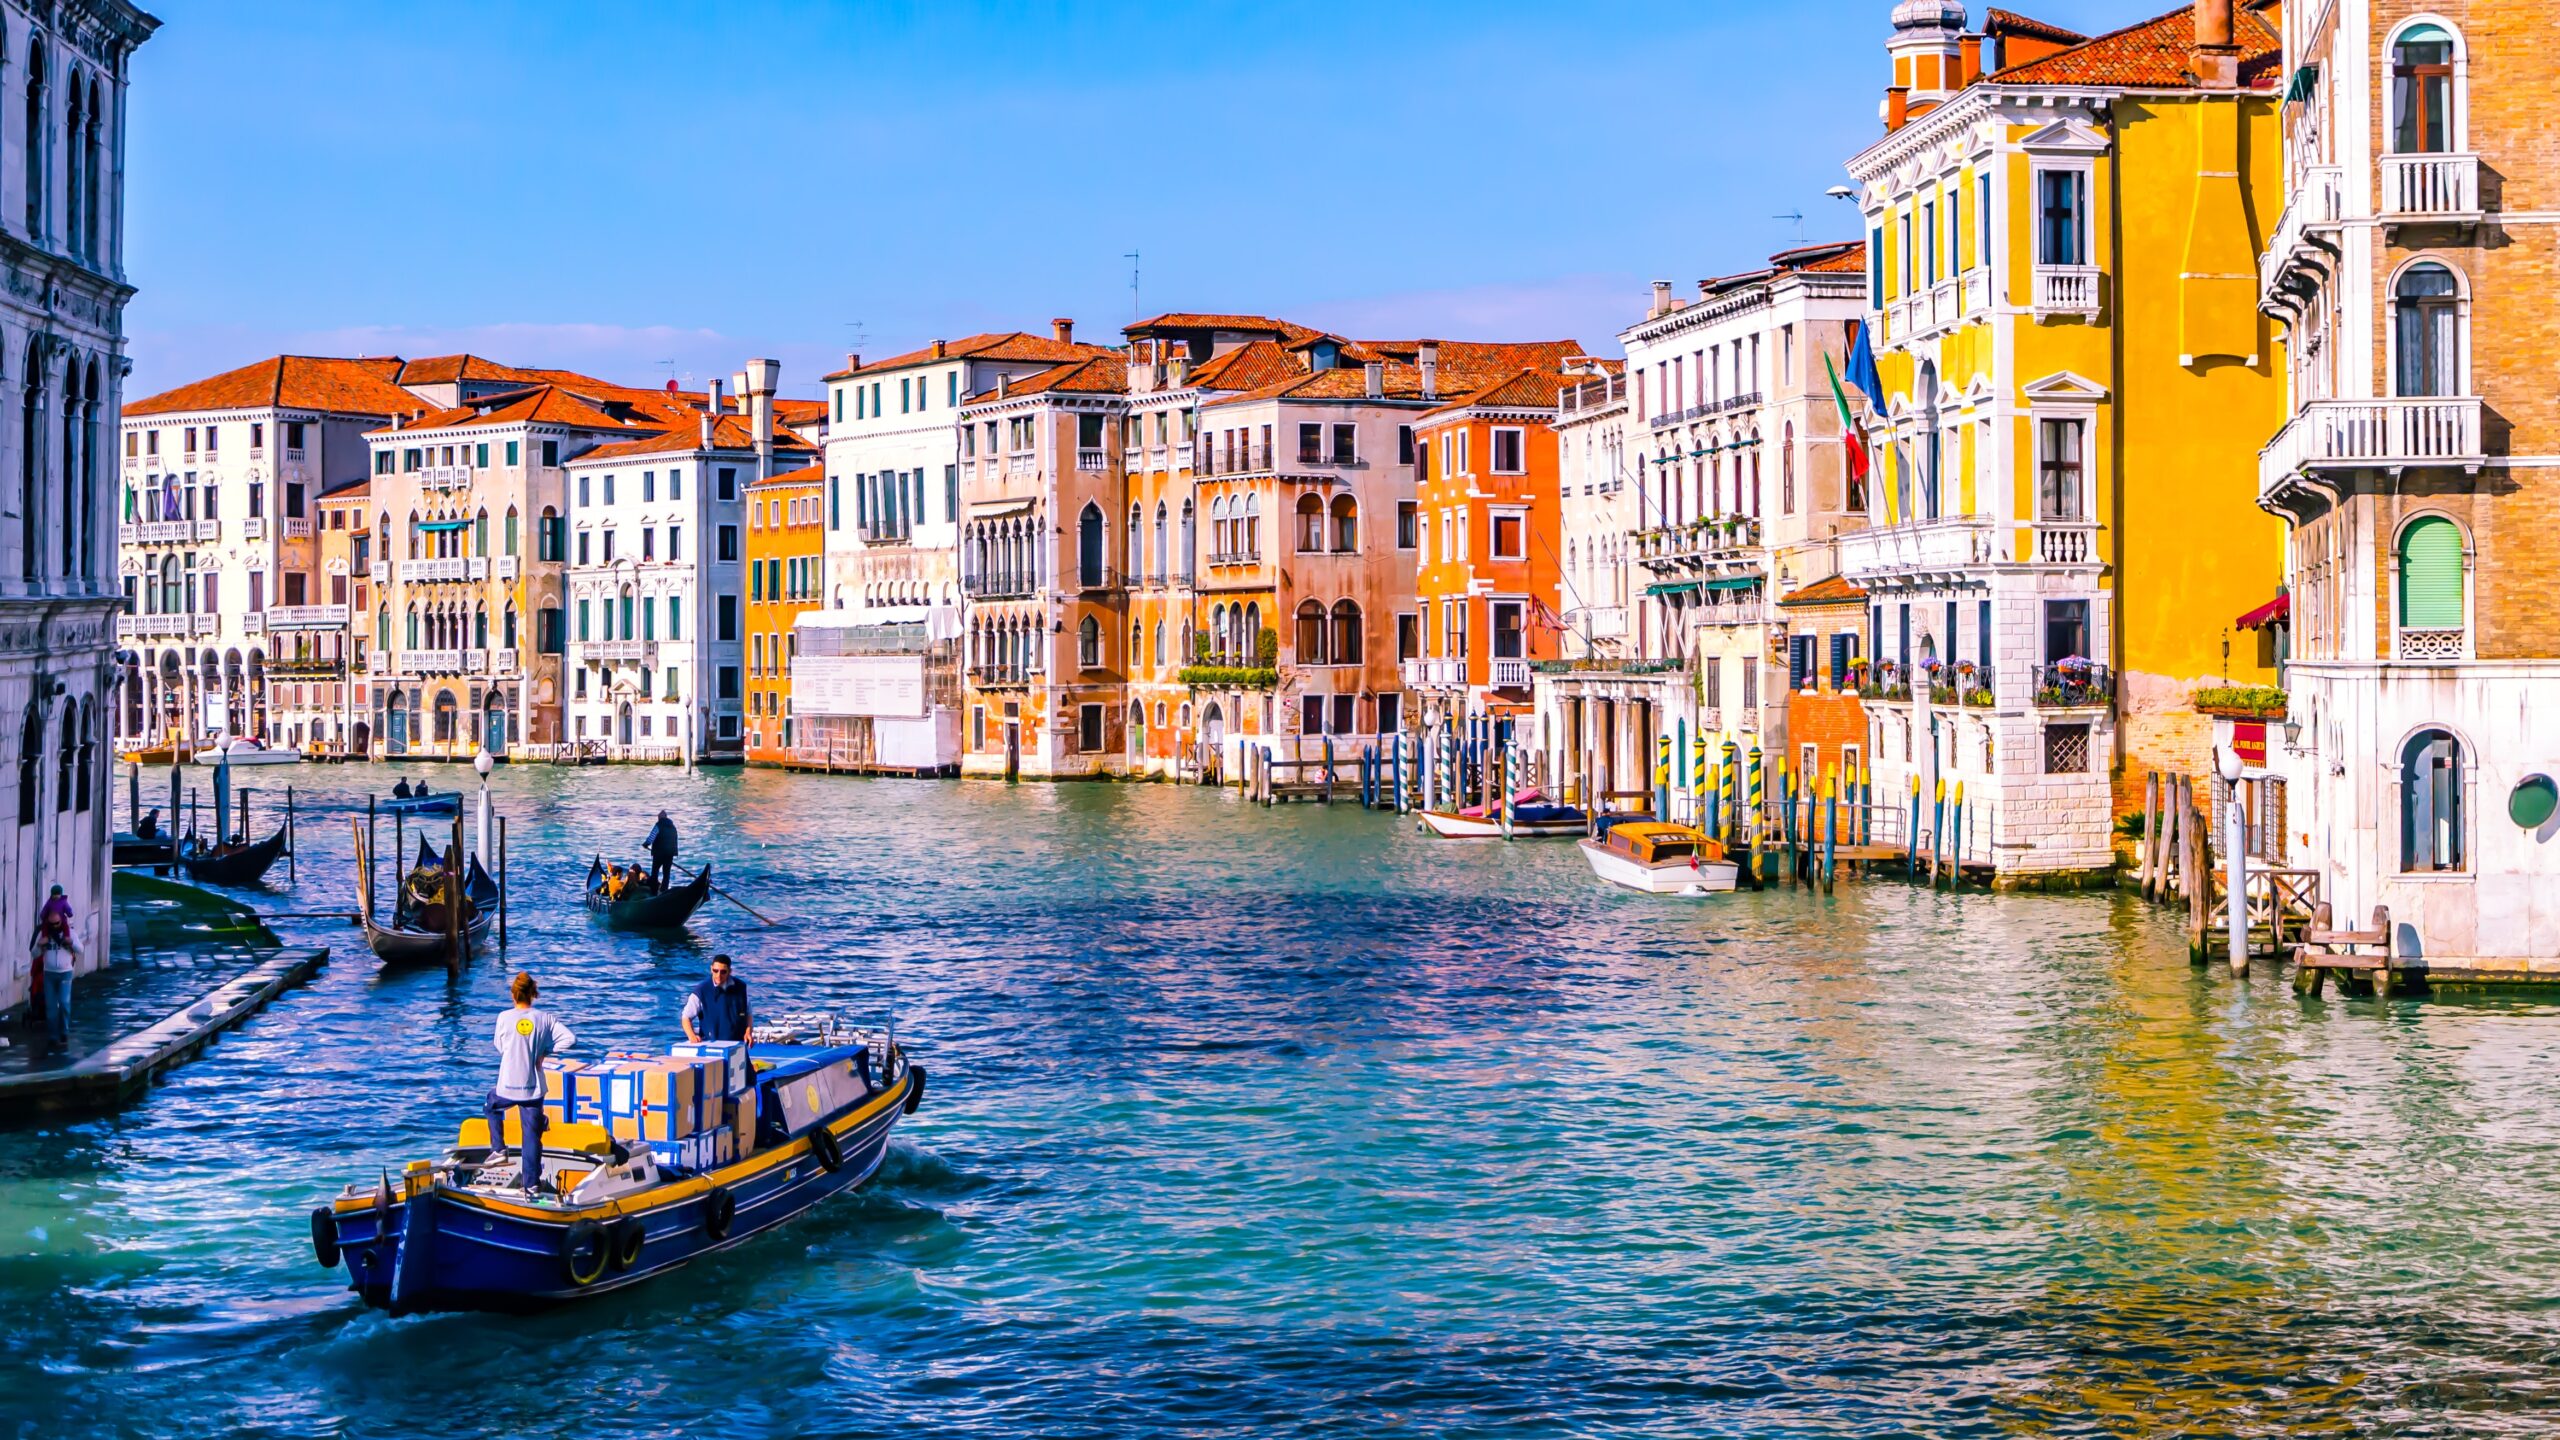 Something in the water: Why February is the best time to visit Venice